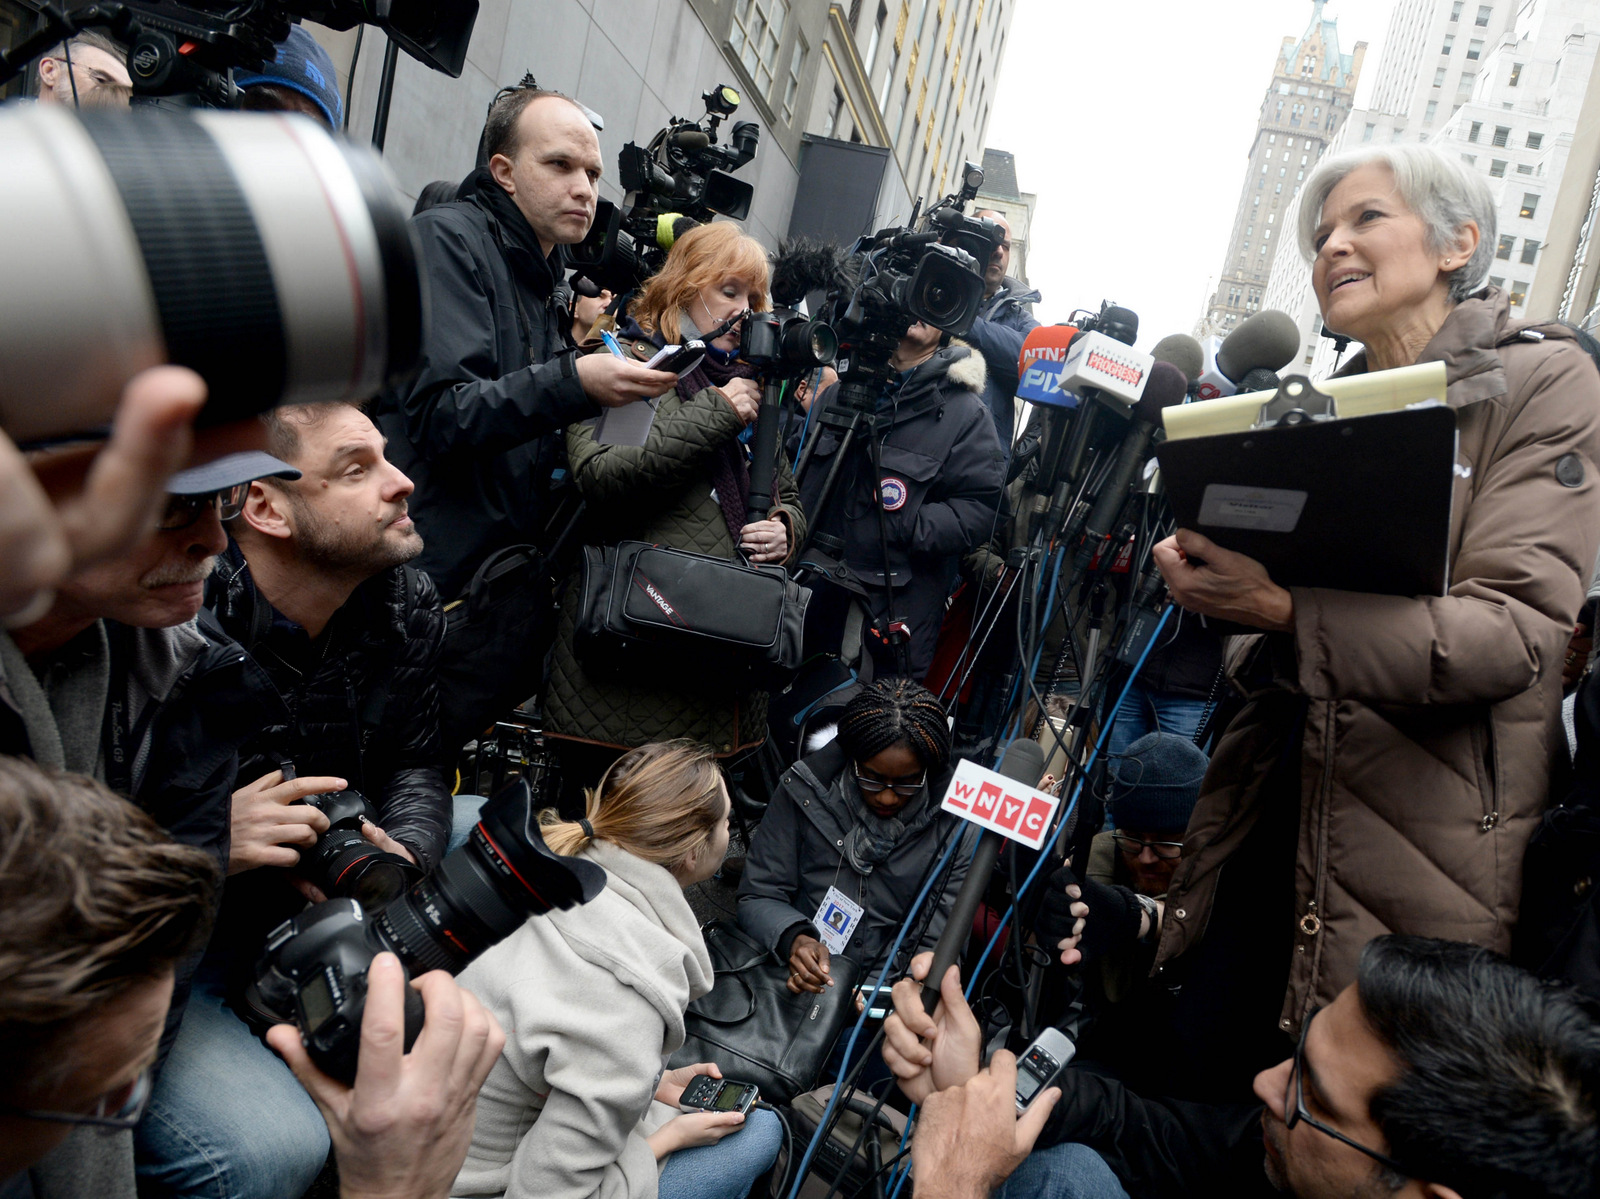 Jill Stein holds a press conference to discuss recount efforts outside Trump Towers in New York City, Dec. 5, 2016. (Photo by: Dennis Van Tine/STAR MAX/IPx via AP)